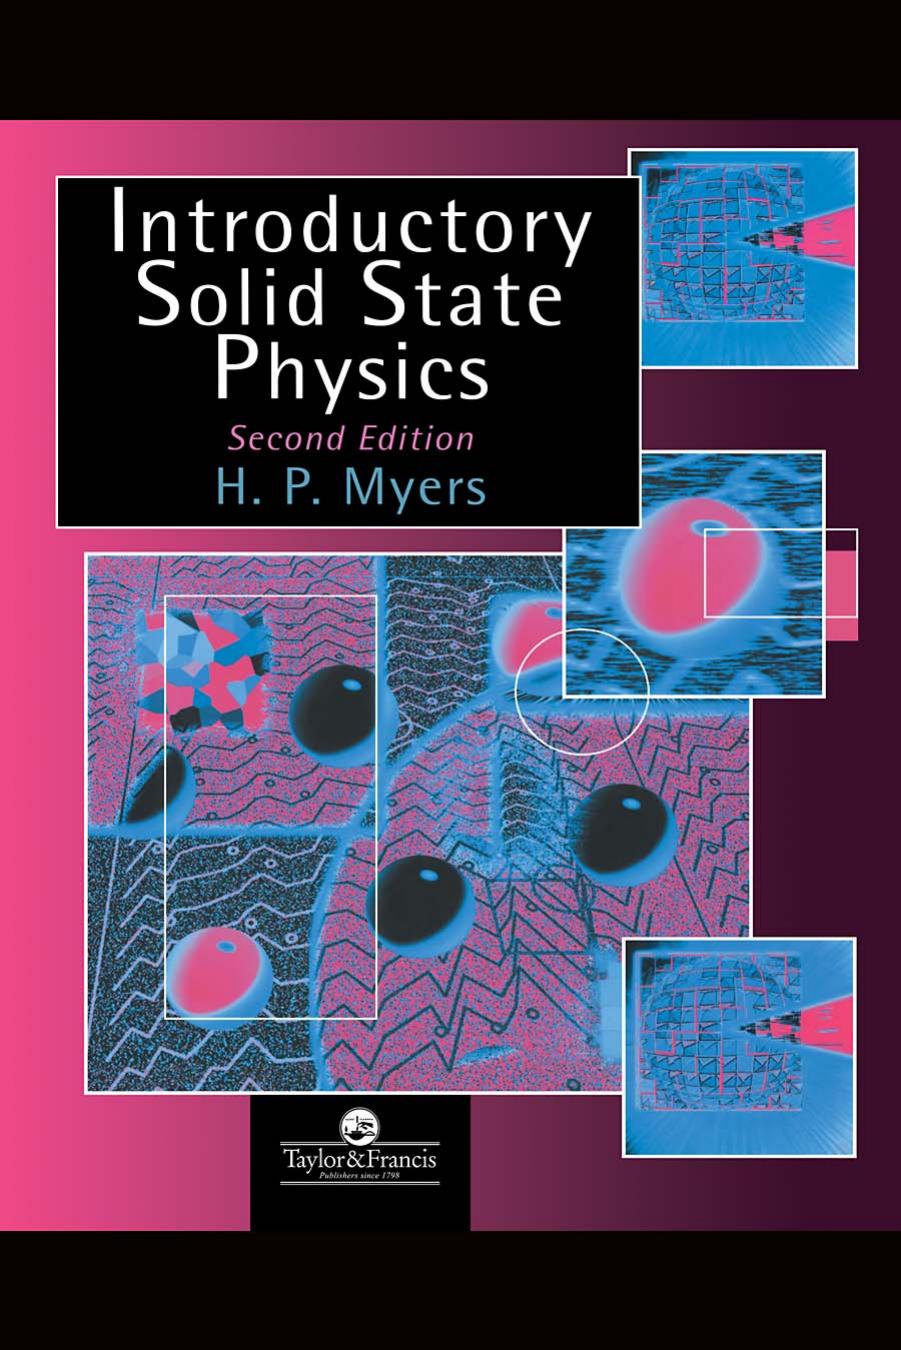 Introductory Solid State Physics (Second Edition)